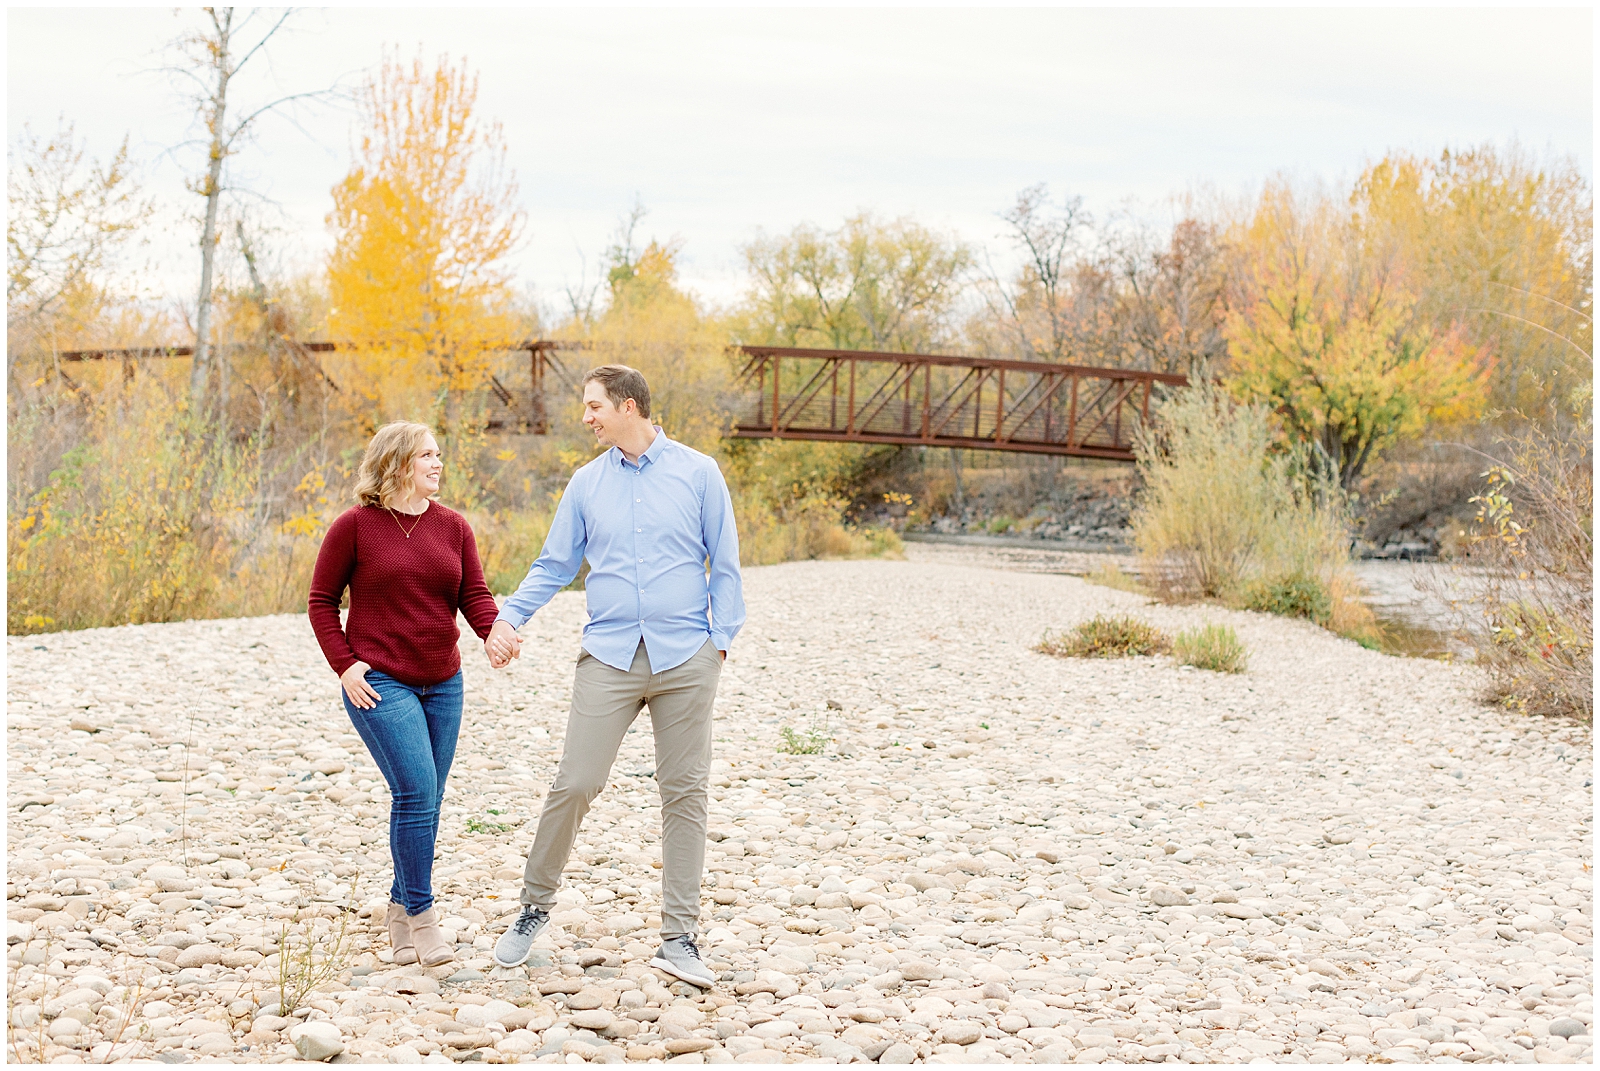 Fall Boise River Engagement Session